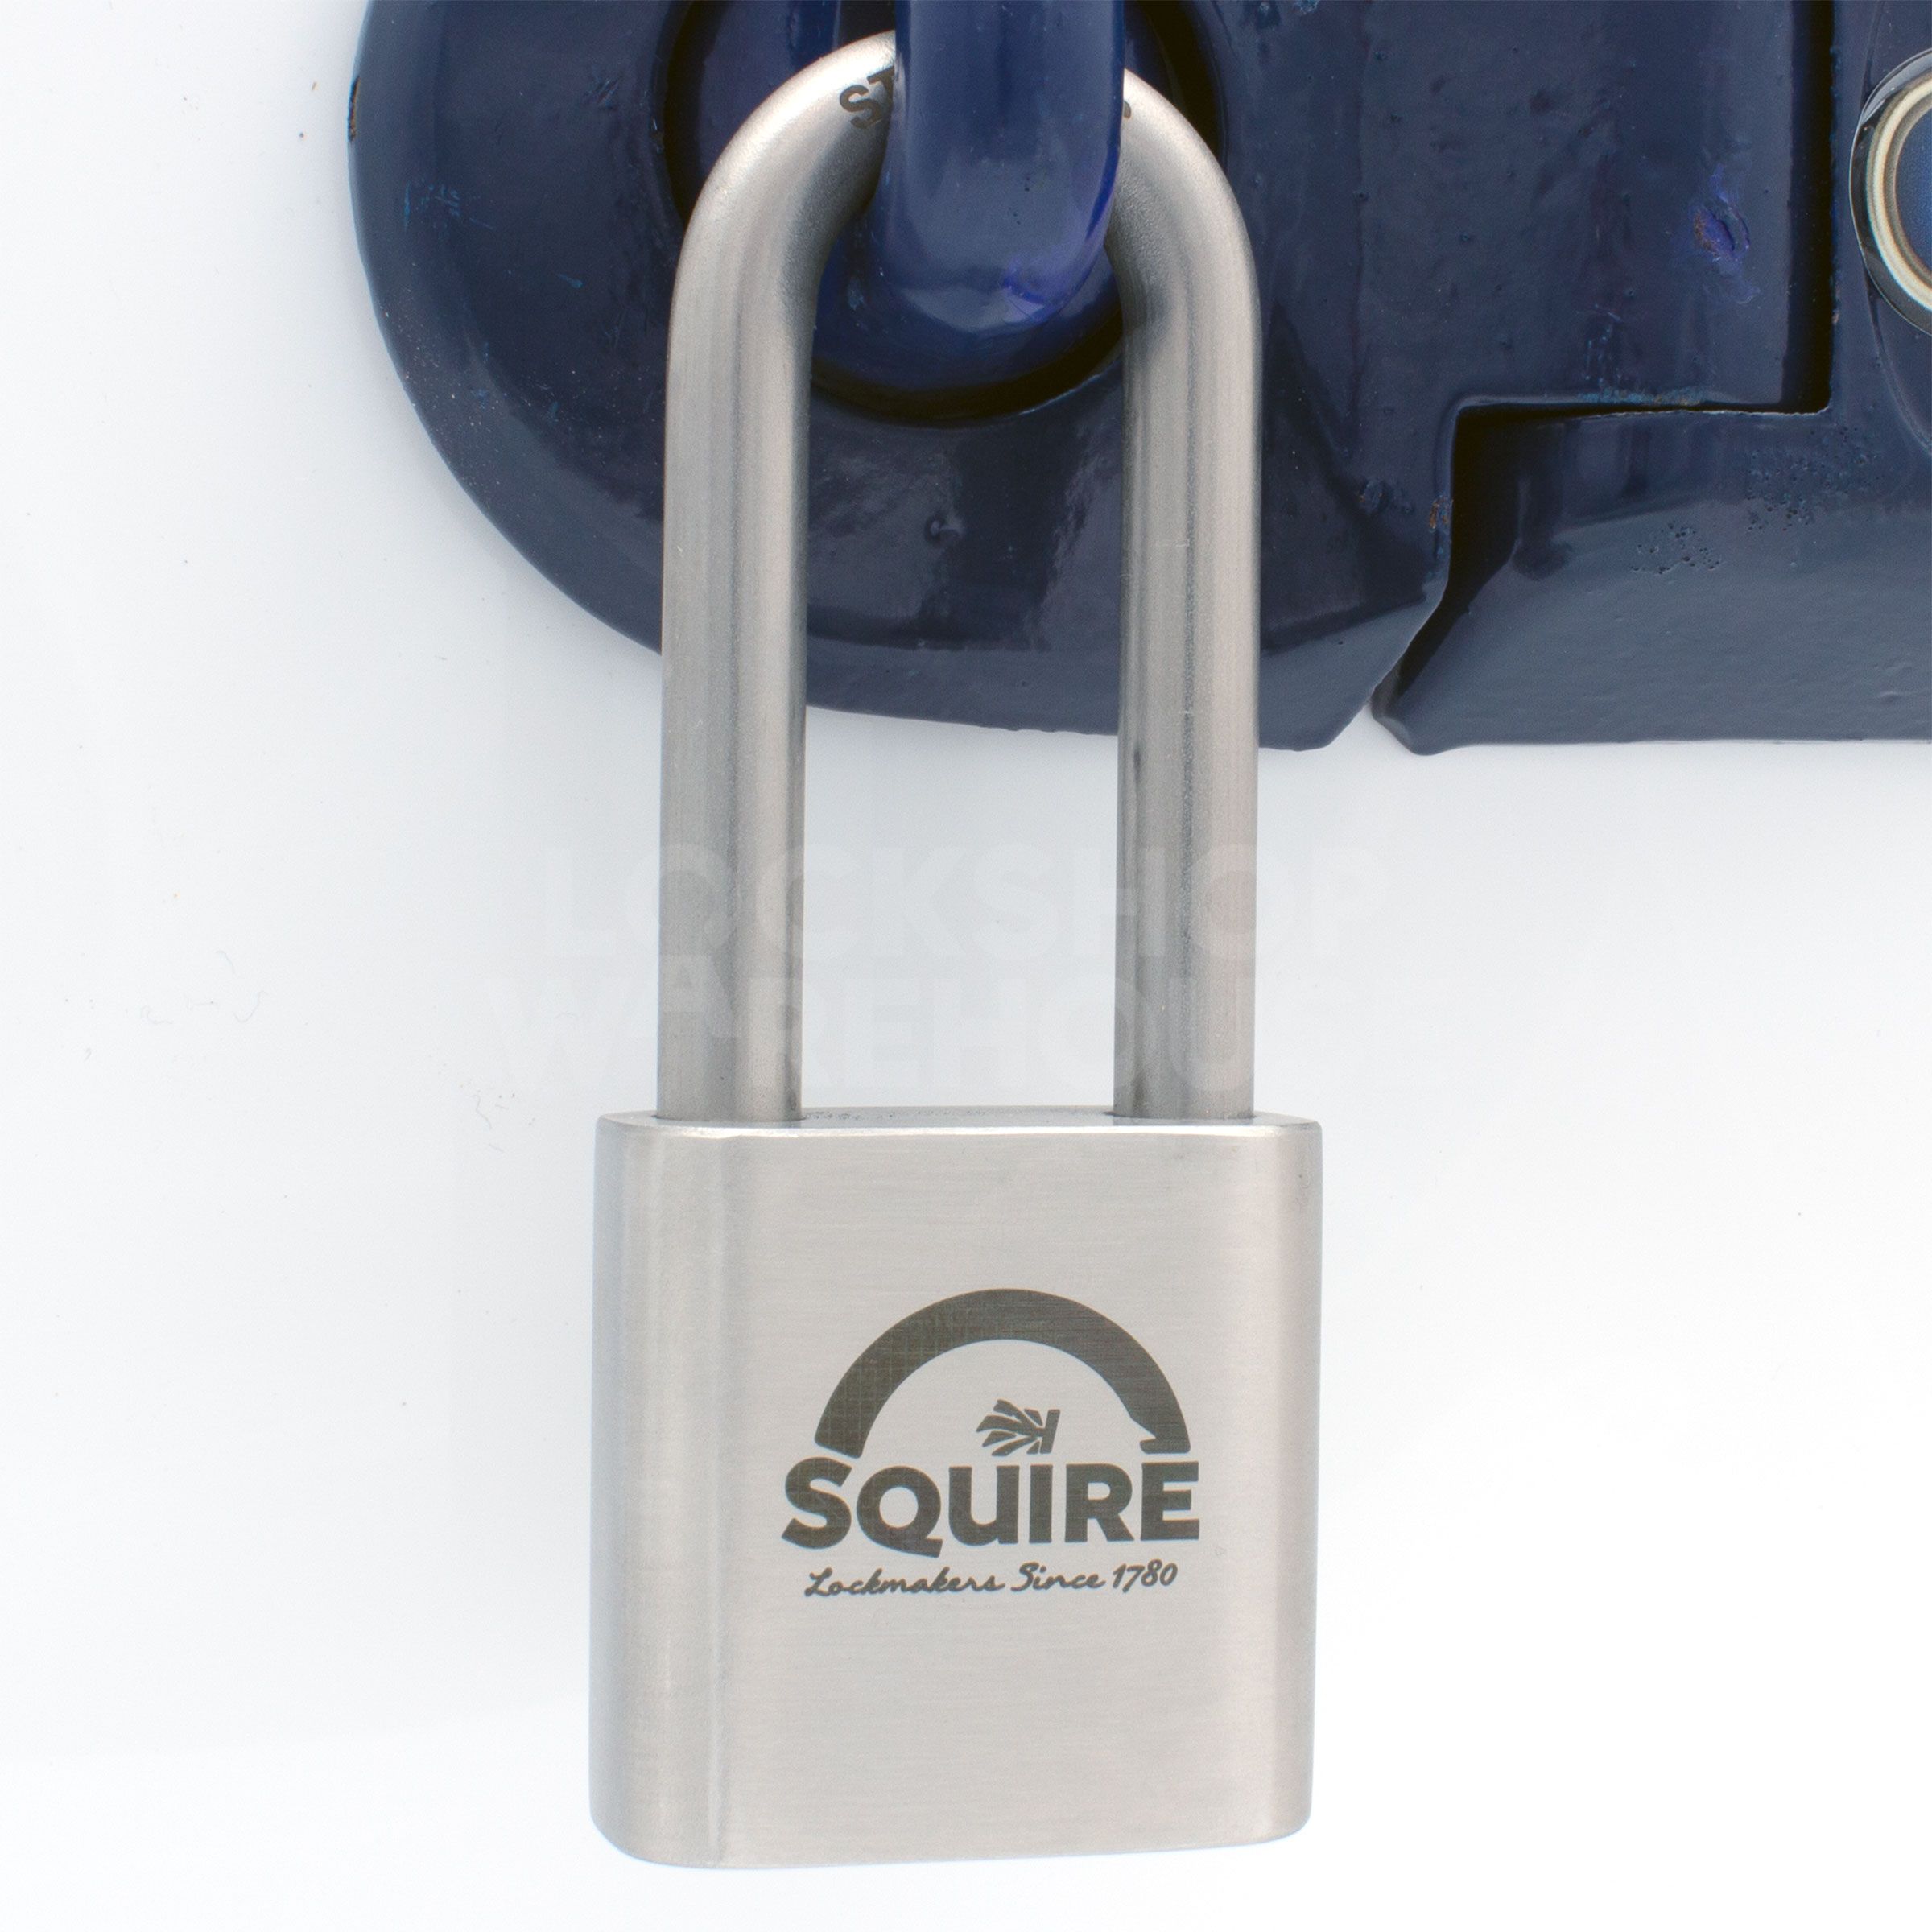 SQUIRE Stronghold® ST50S - 2.5 Long Shackle Stainless Steel Padlock